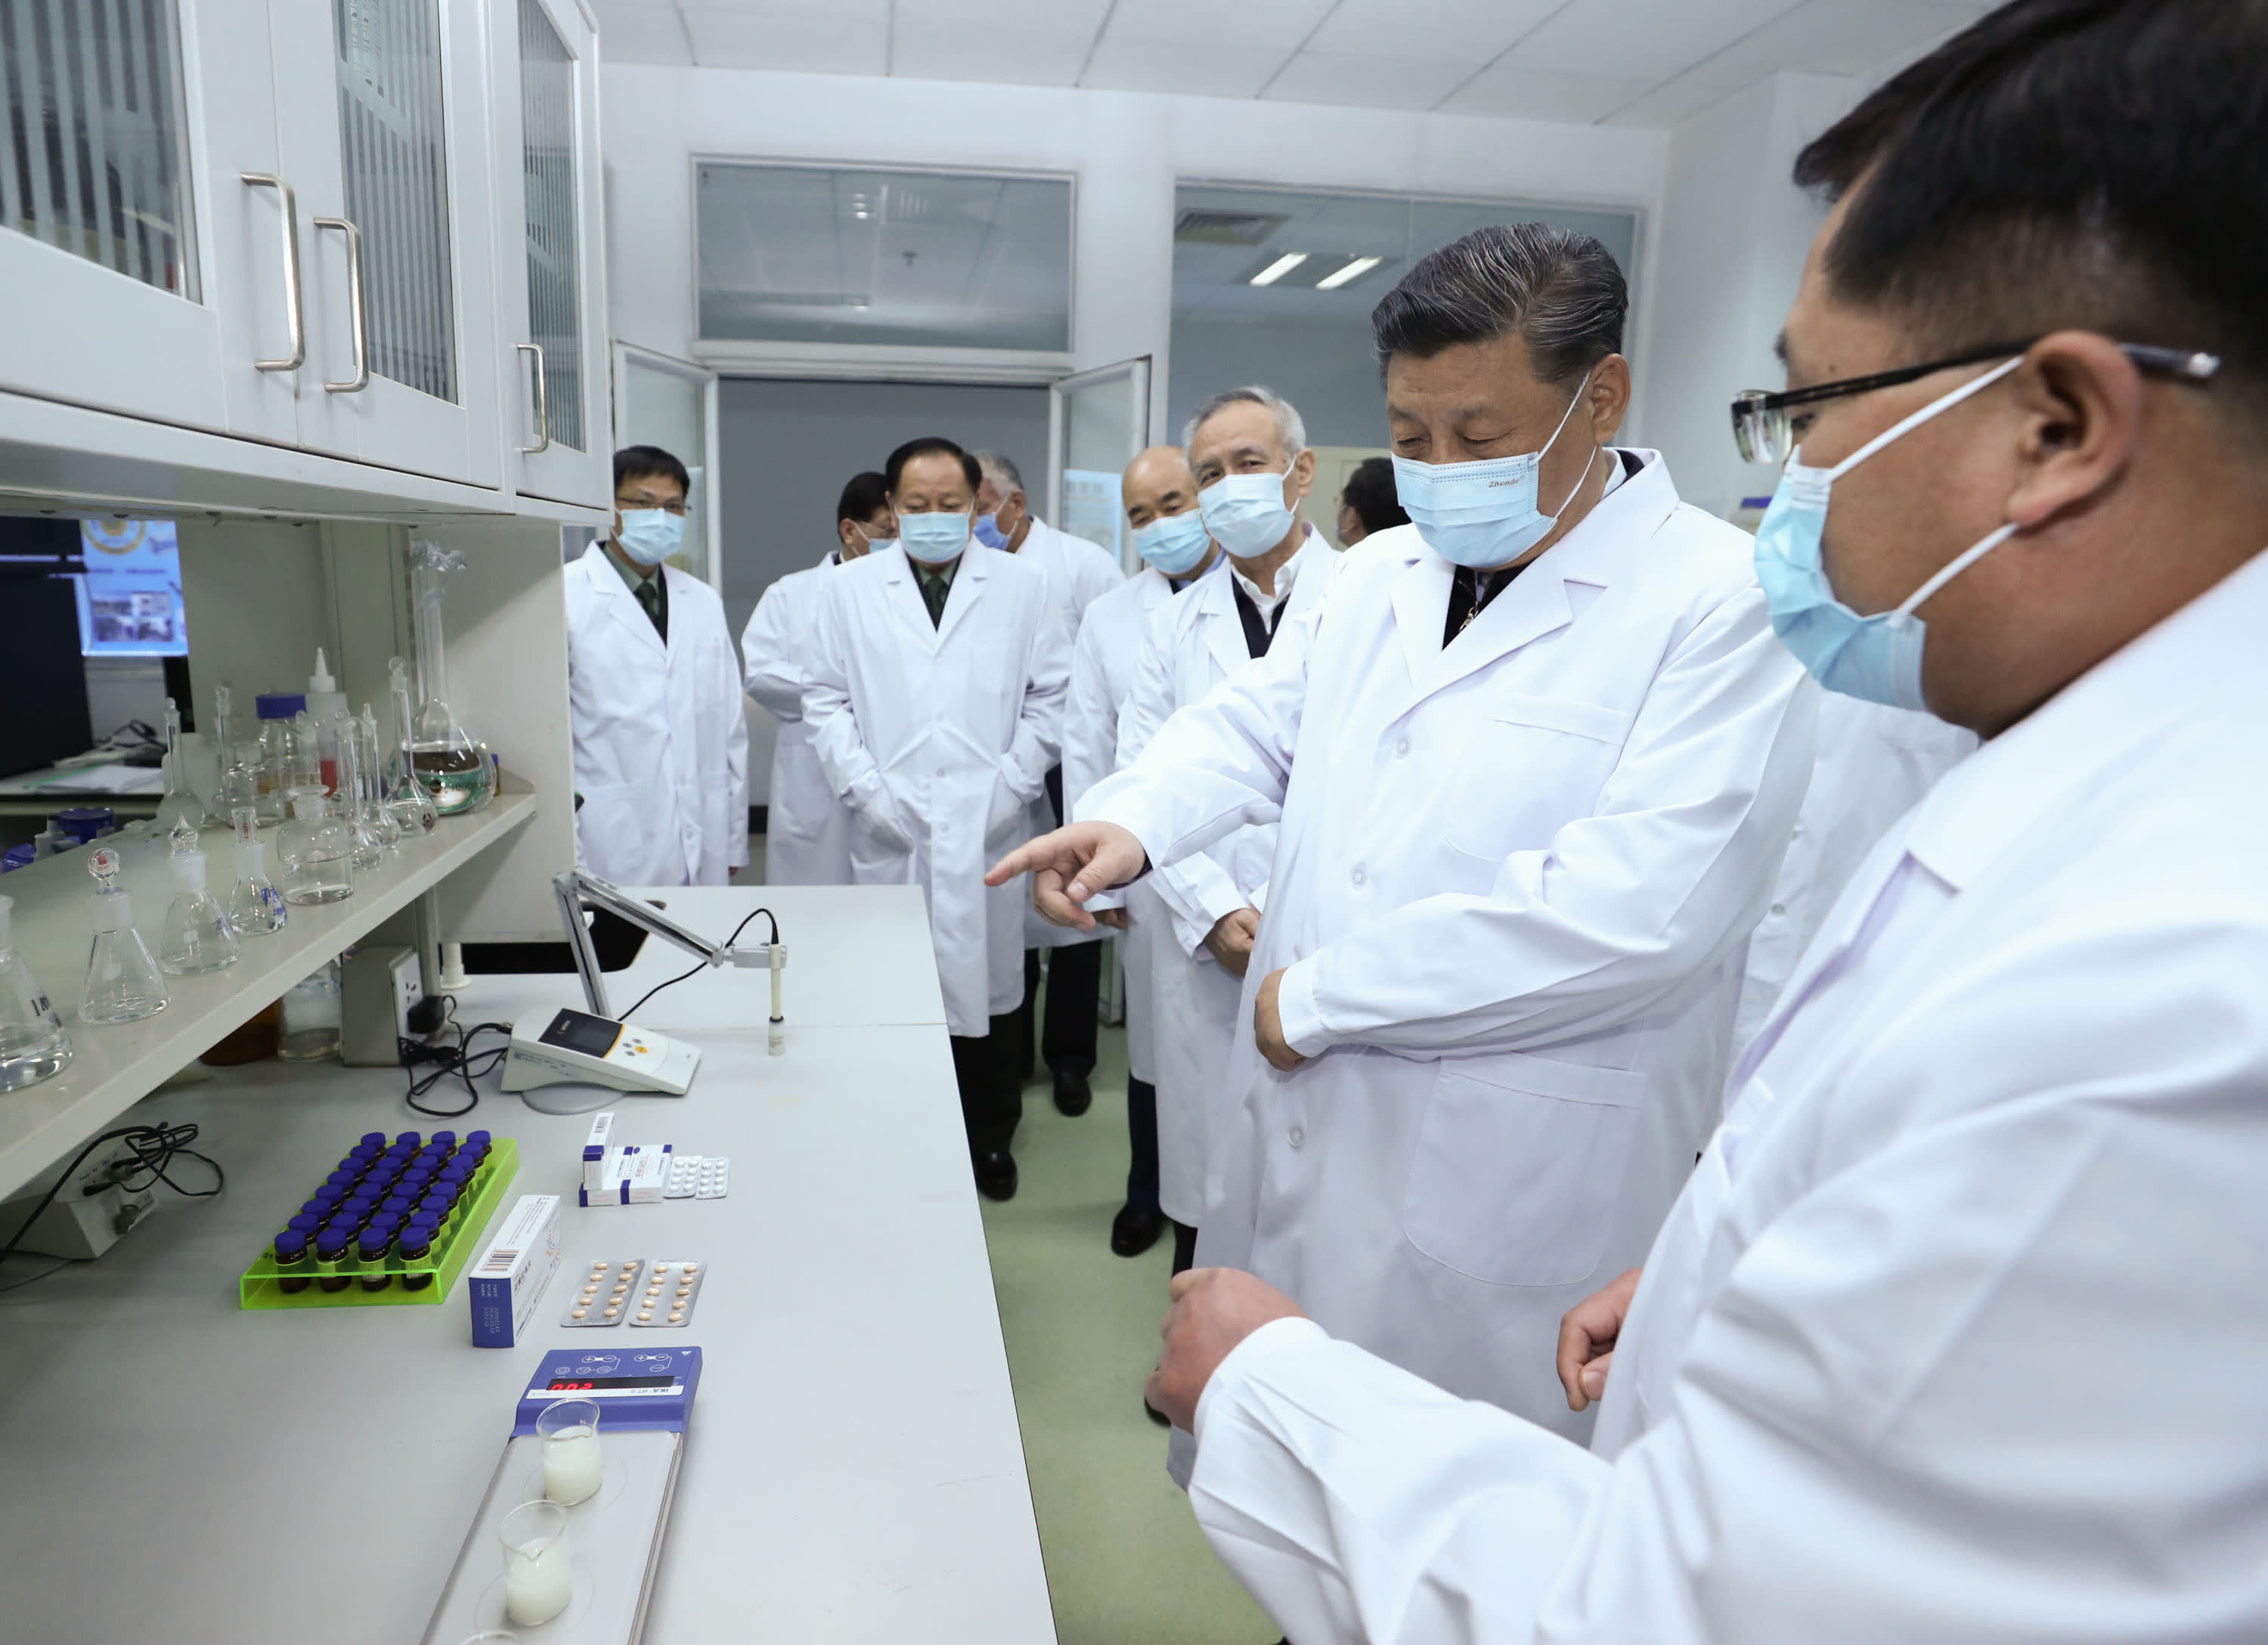 China’s vaccines are likely to fill the gap, but they face confidence problems